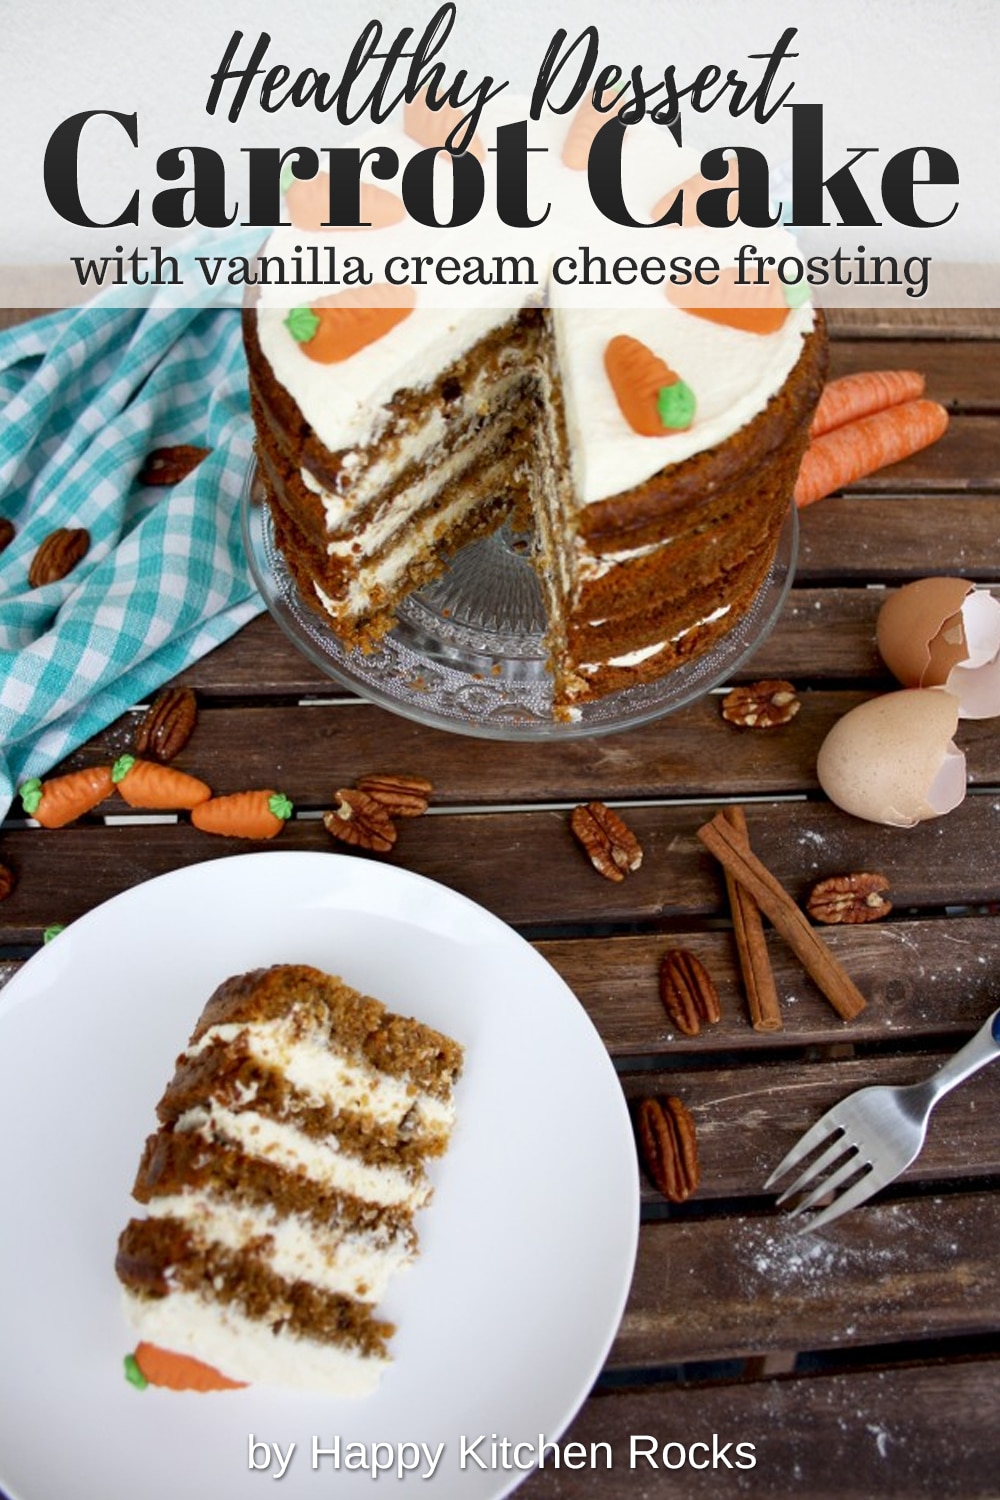 Super Moist Carrot Cake with Vanilla Cream Cheese Frosting Collage with Text Overlay